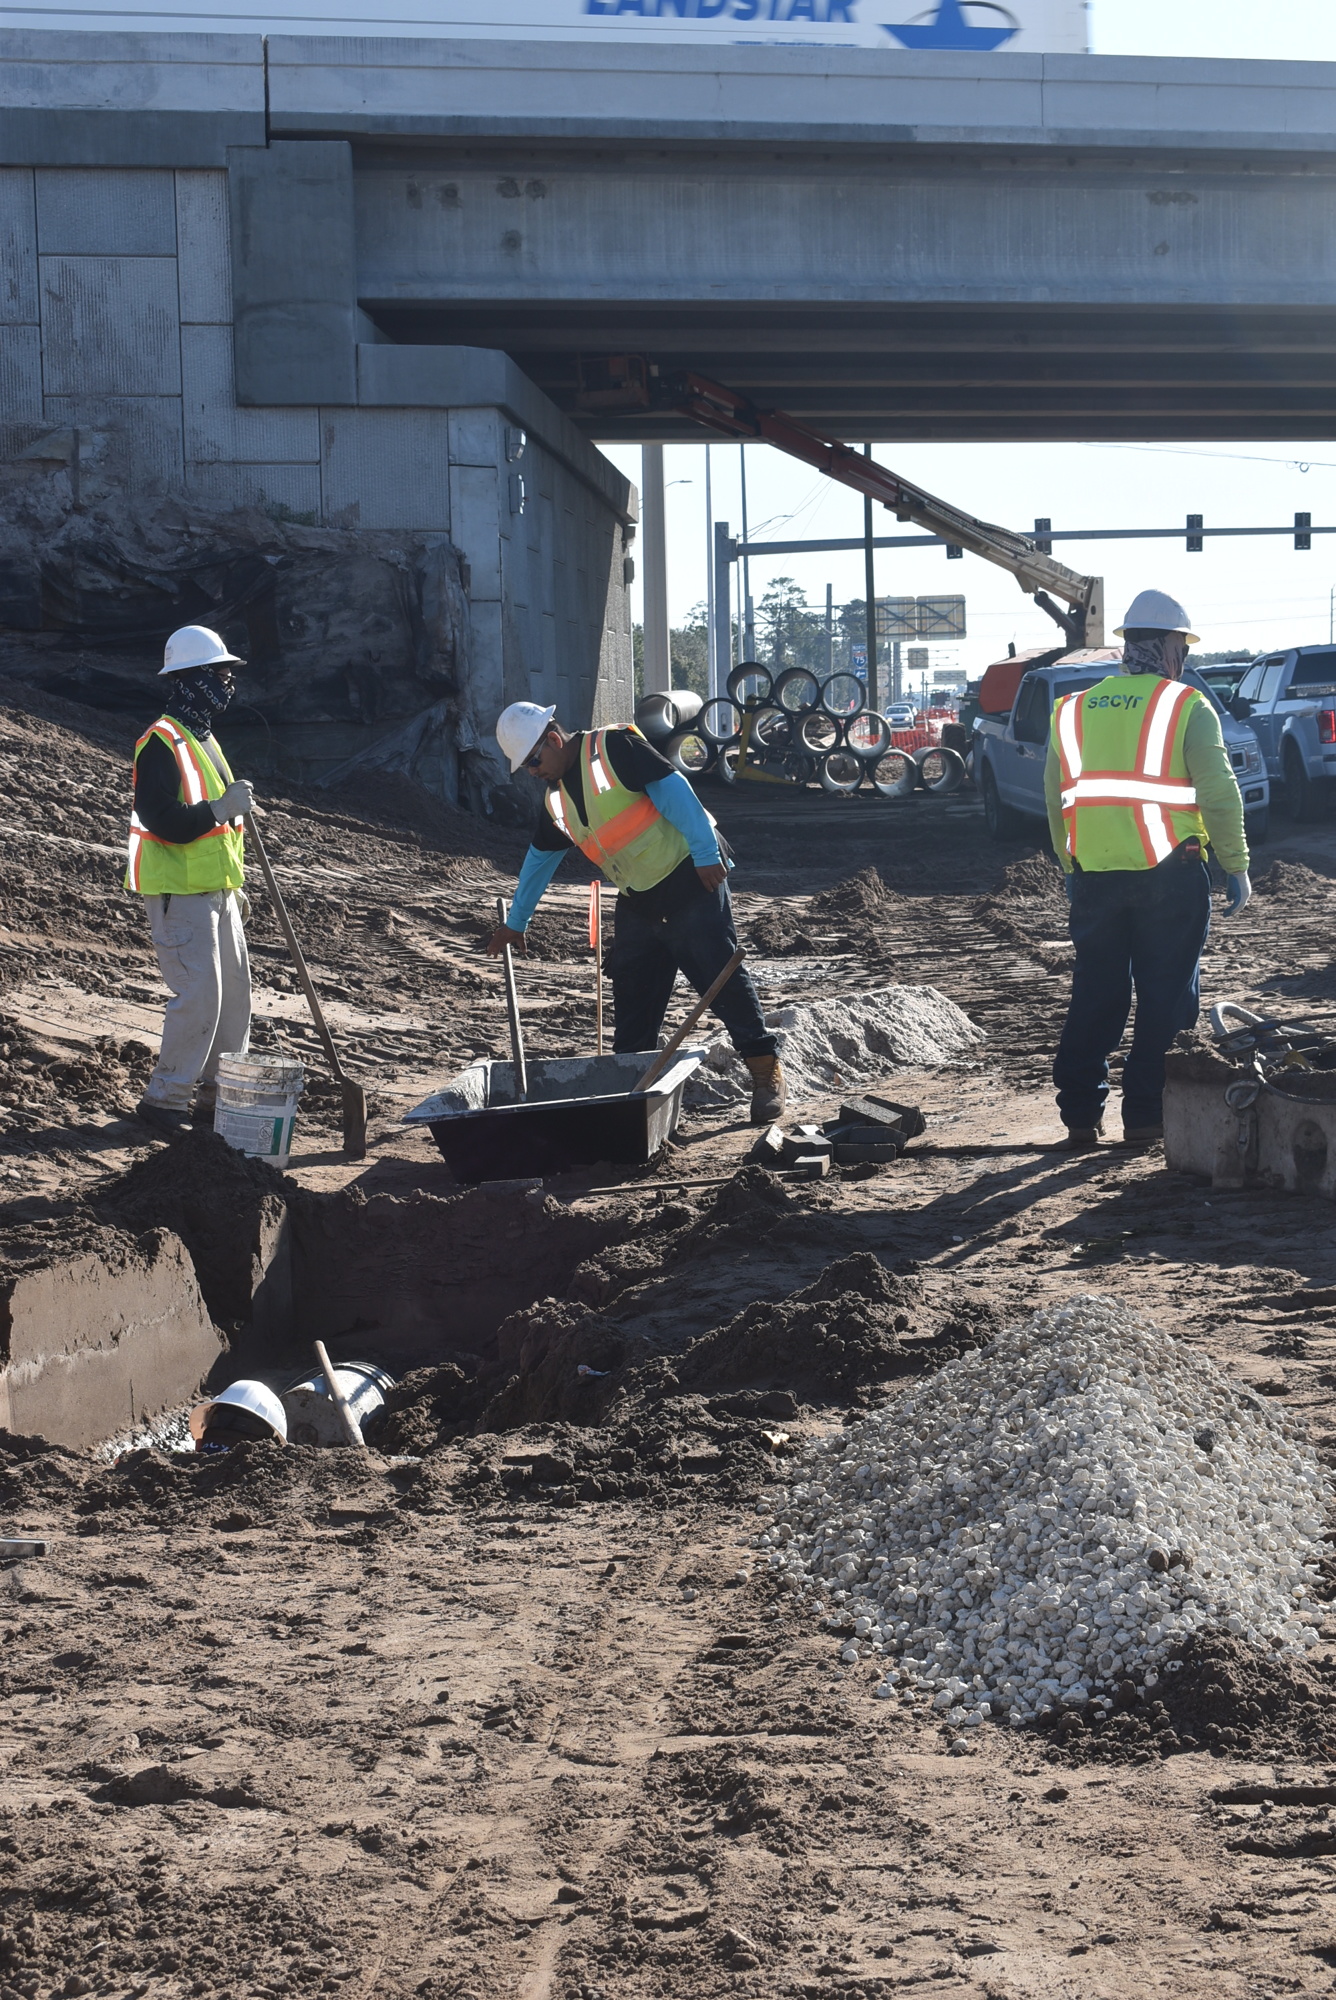 John Woodbury, Isai Rodriguez (in hole), Jose Gonzalez and Primo Gaines, who all work for construction company Sacyr, work on stormwater drainage between the I-75 bridges over State Road 70.